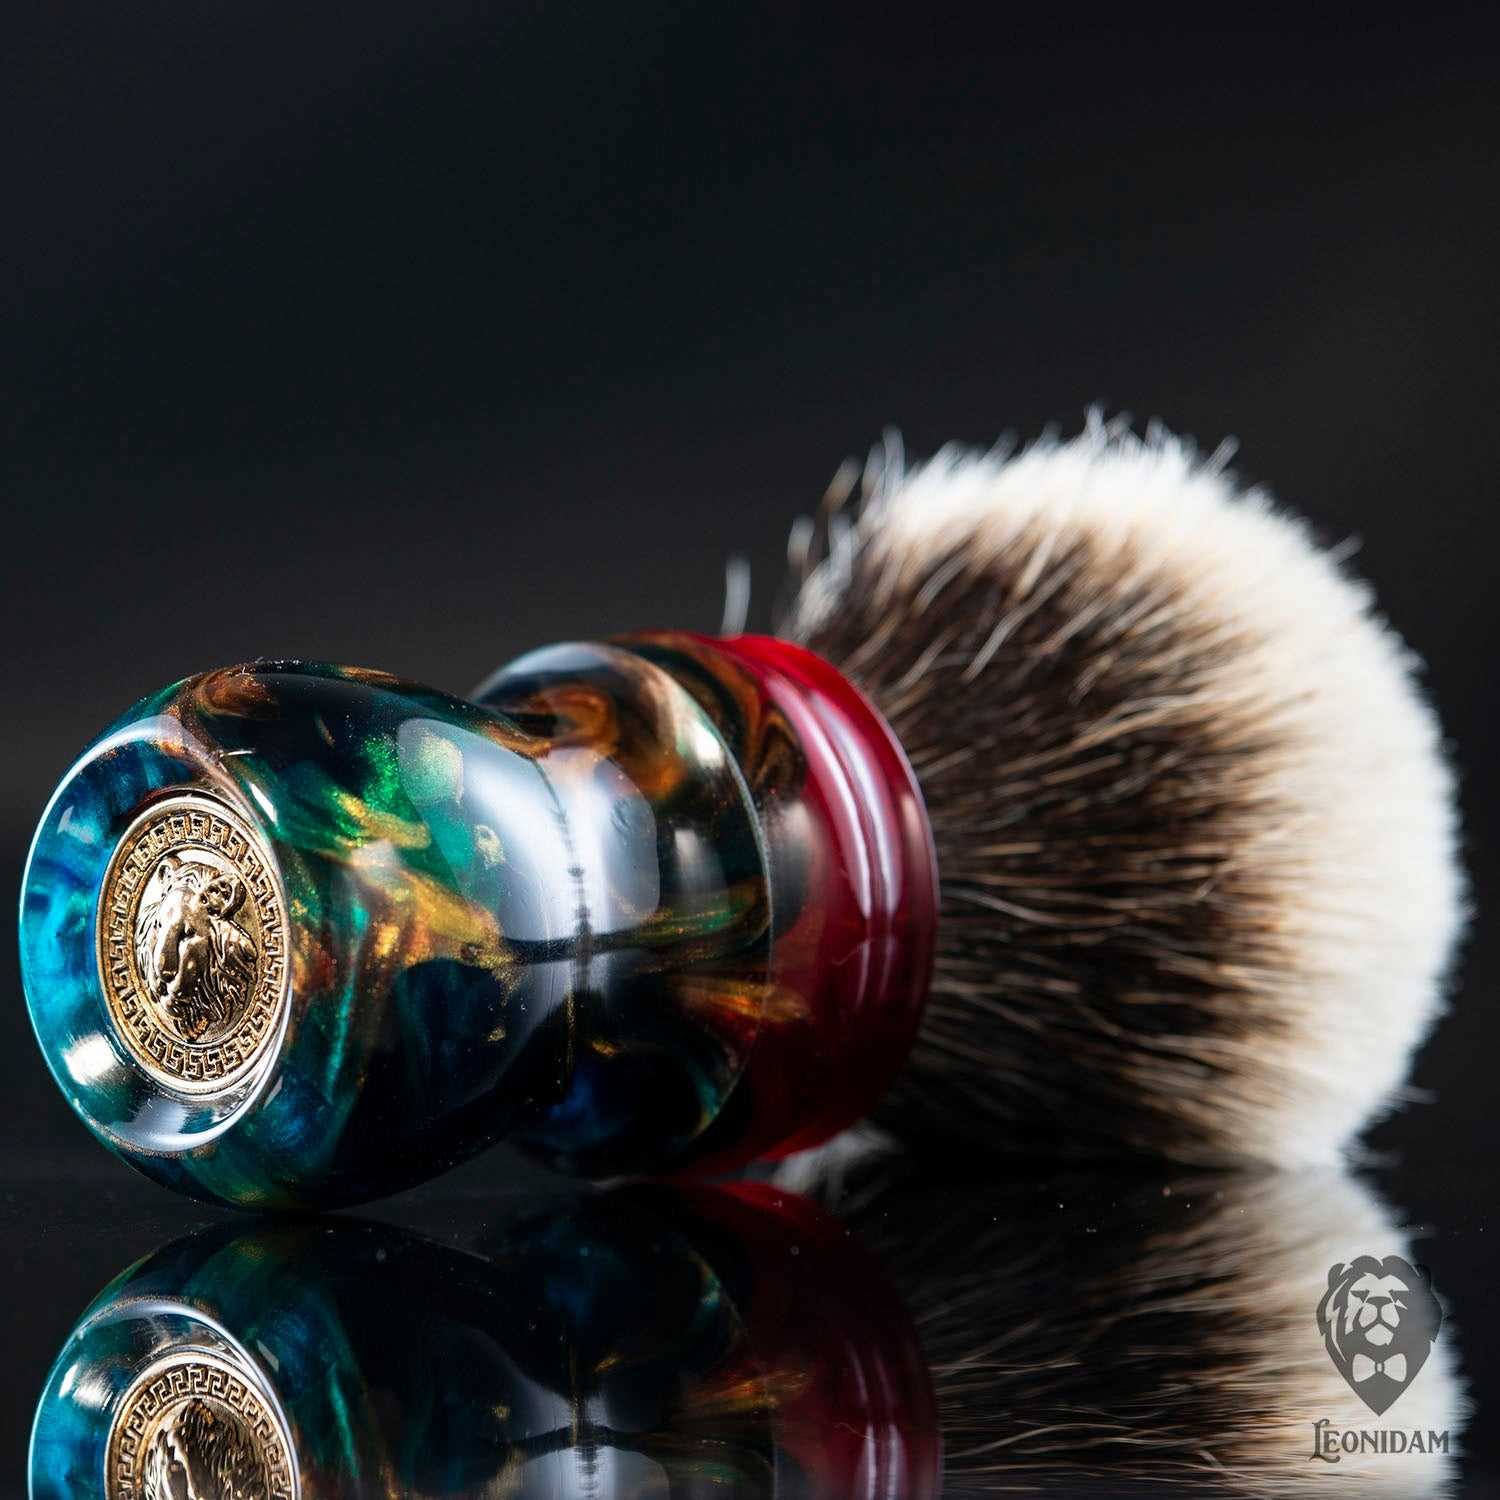 Handmade shaving brush "Vivaldi", with blue, red and gold hand poured resin handle .